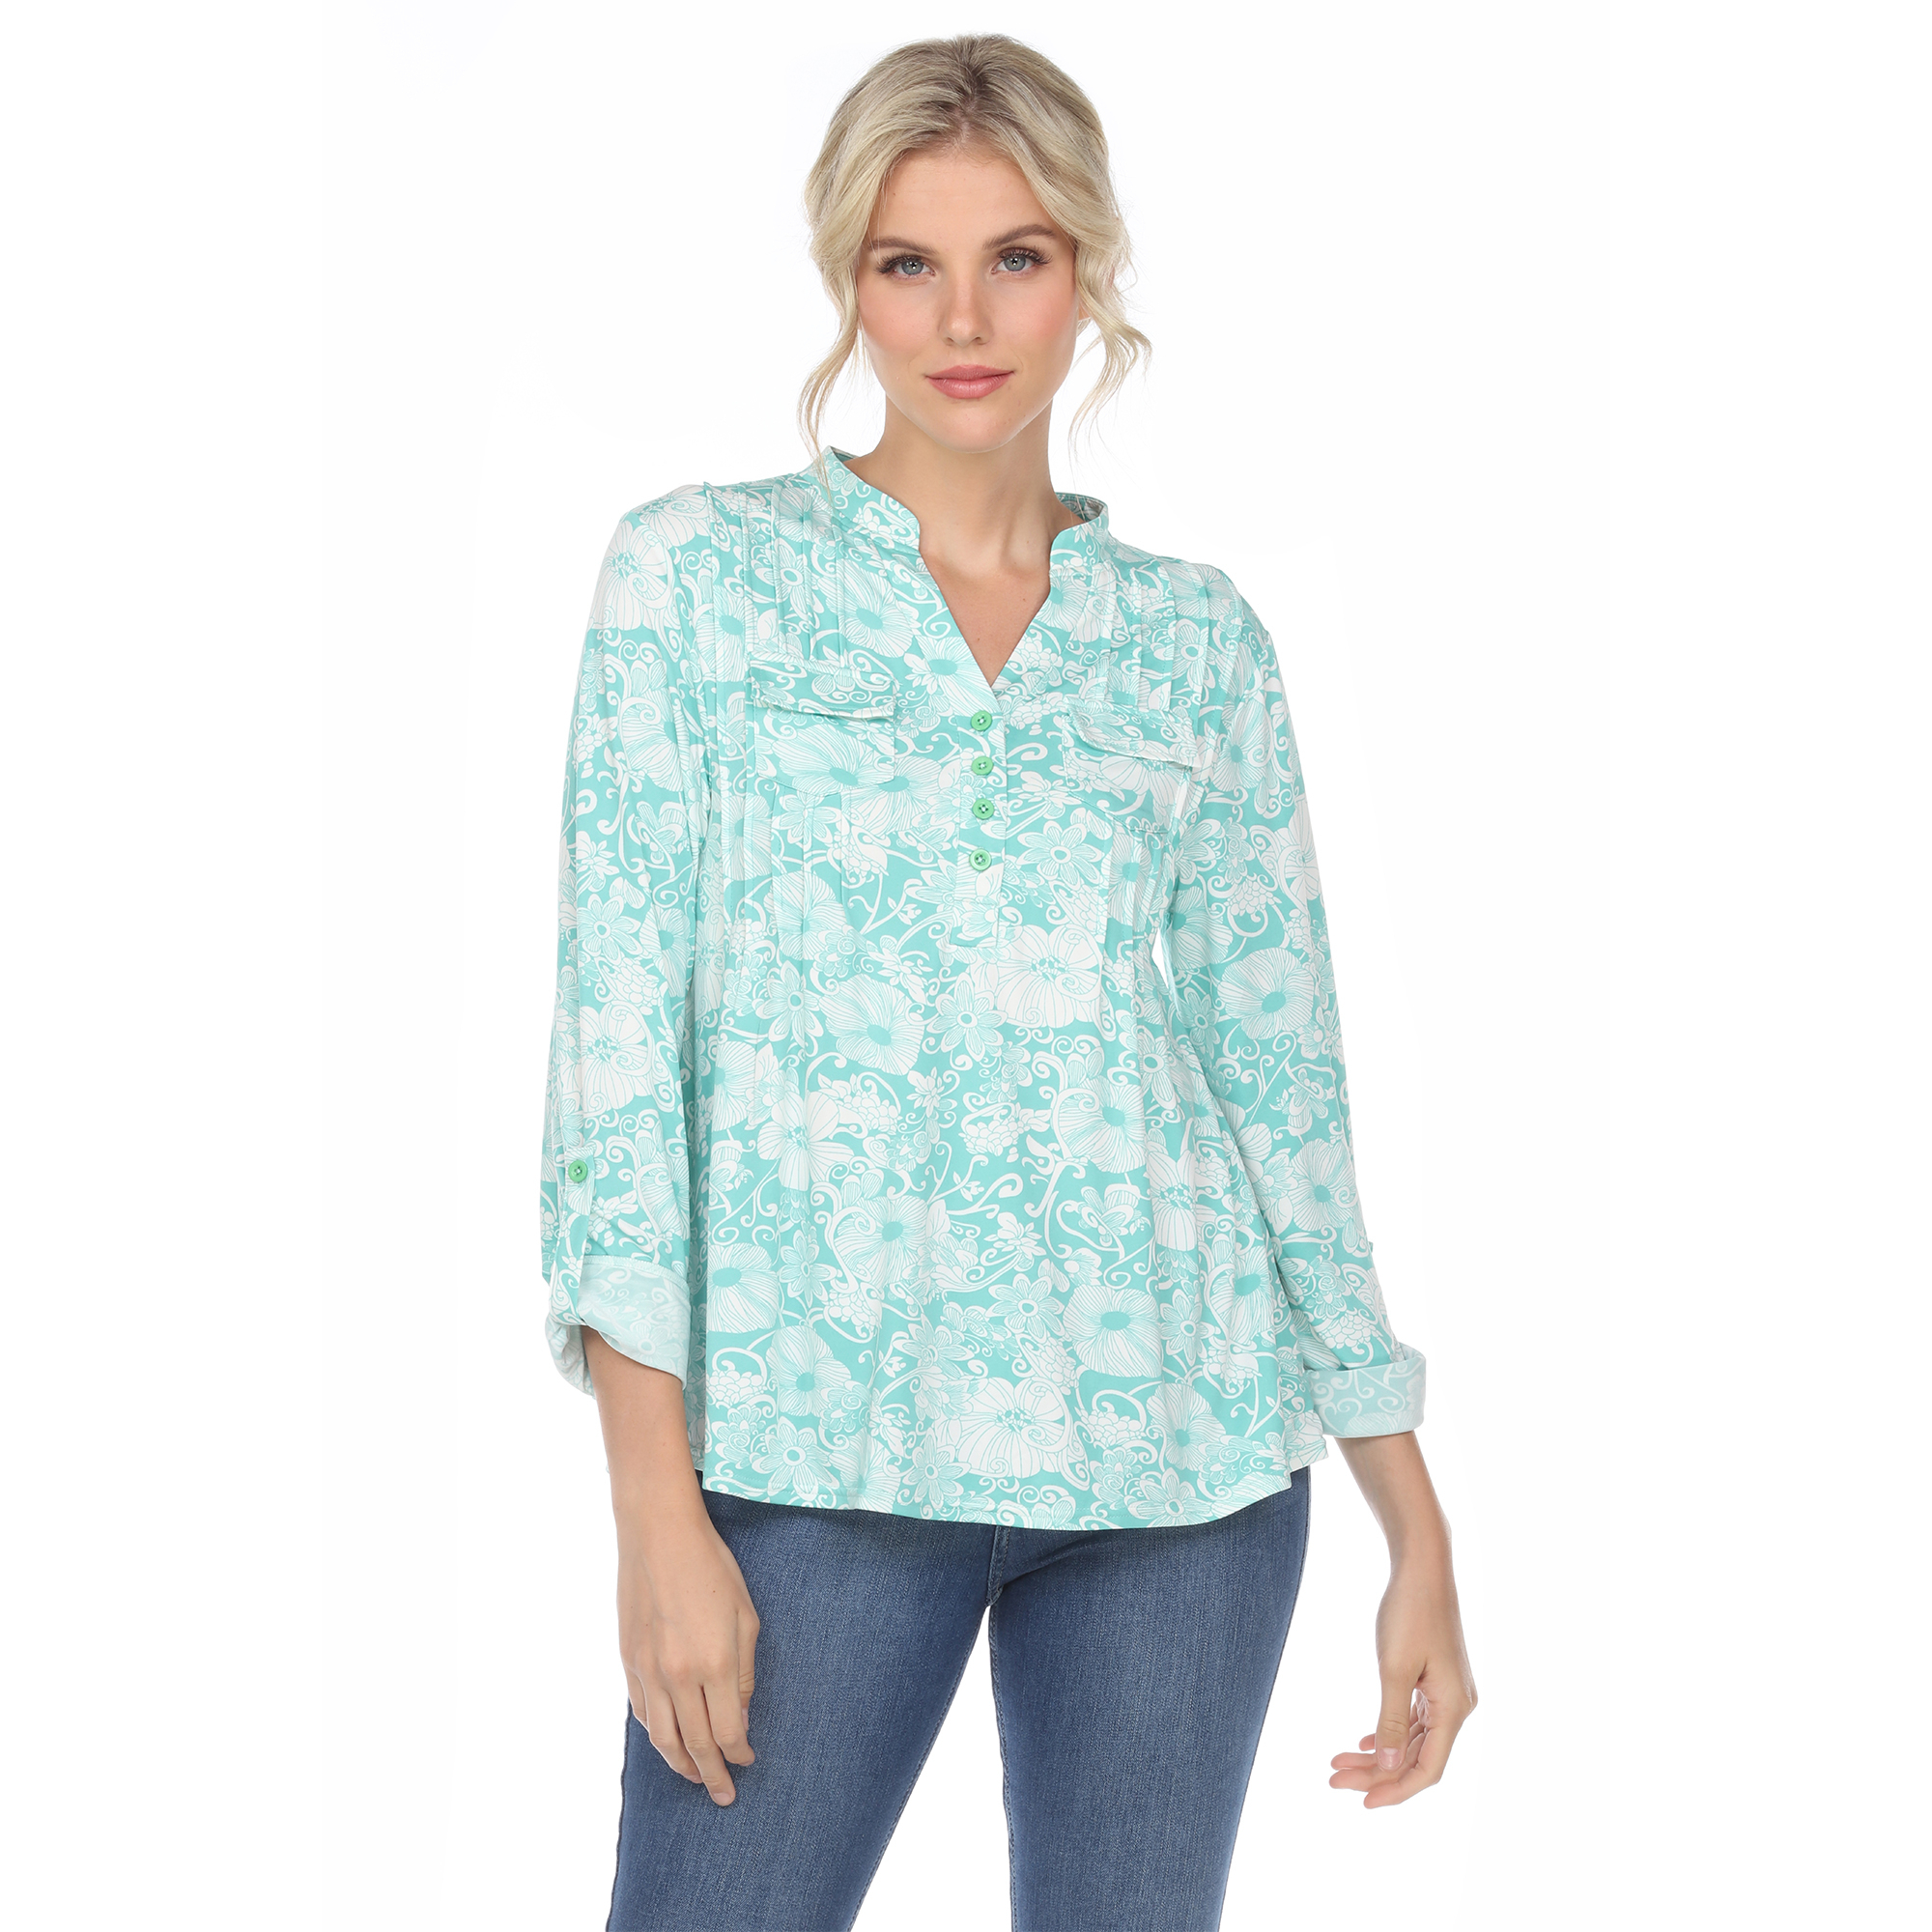 White Mark Women's Pleated Long Sleeve Floral Print Blouse - Mint, 3X